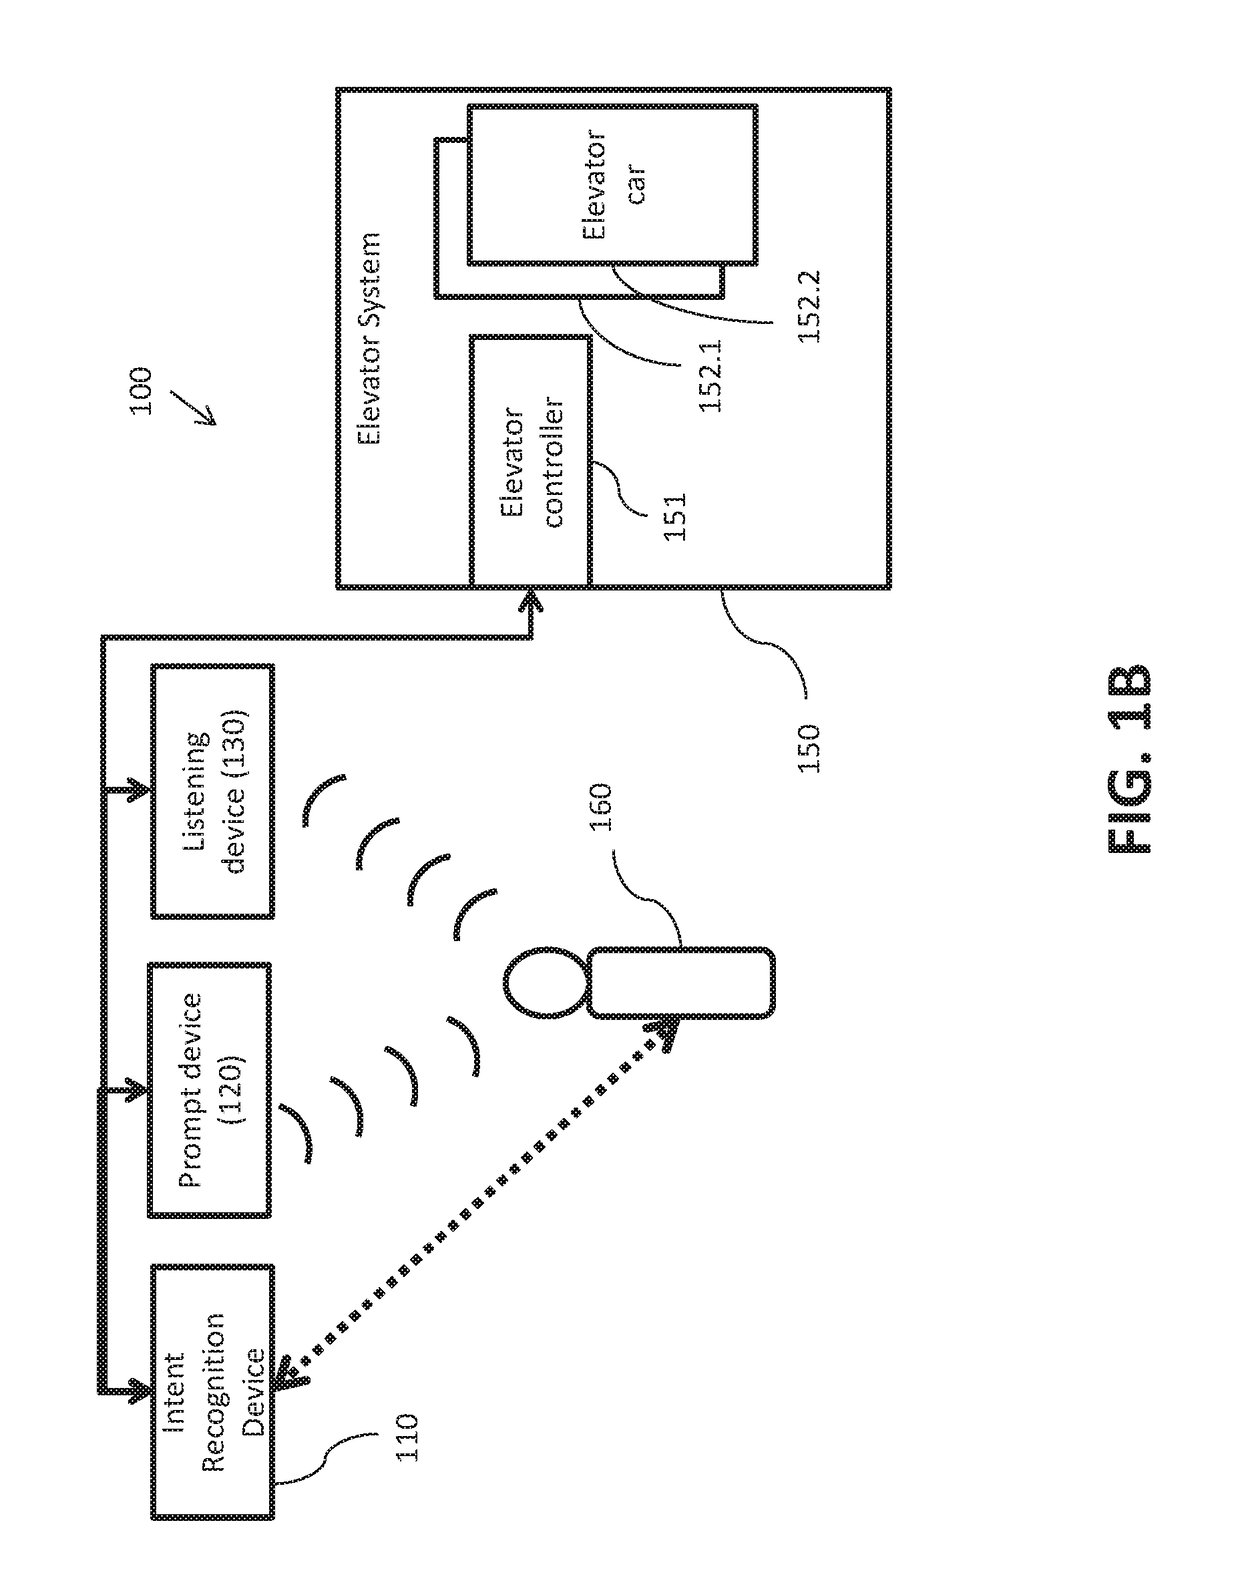 Intention recognition for triggering voice recognition system